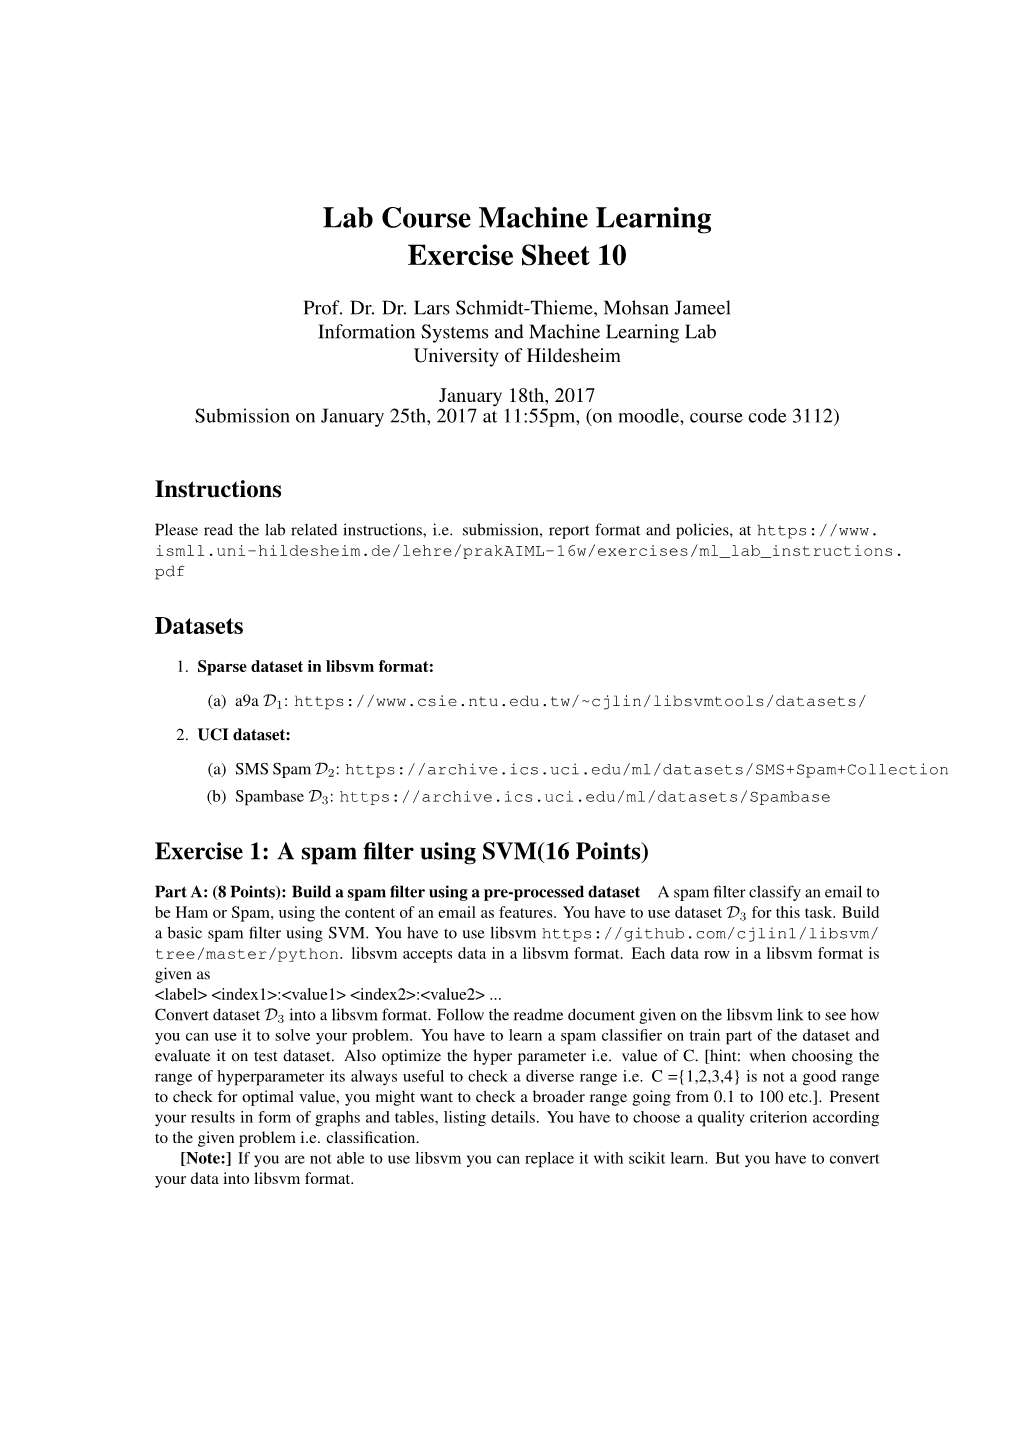 Lab Course Machine Learning Exercise Sheet 10